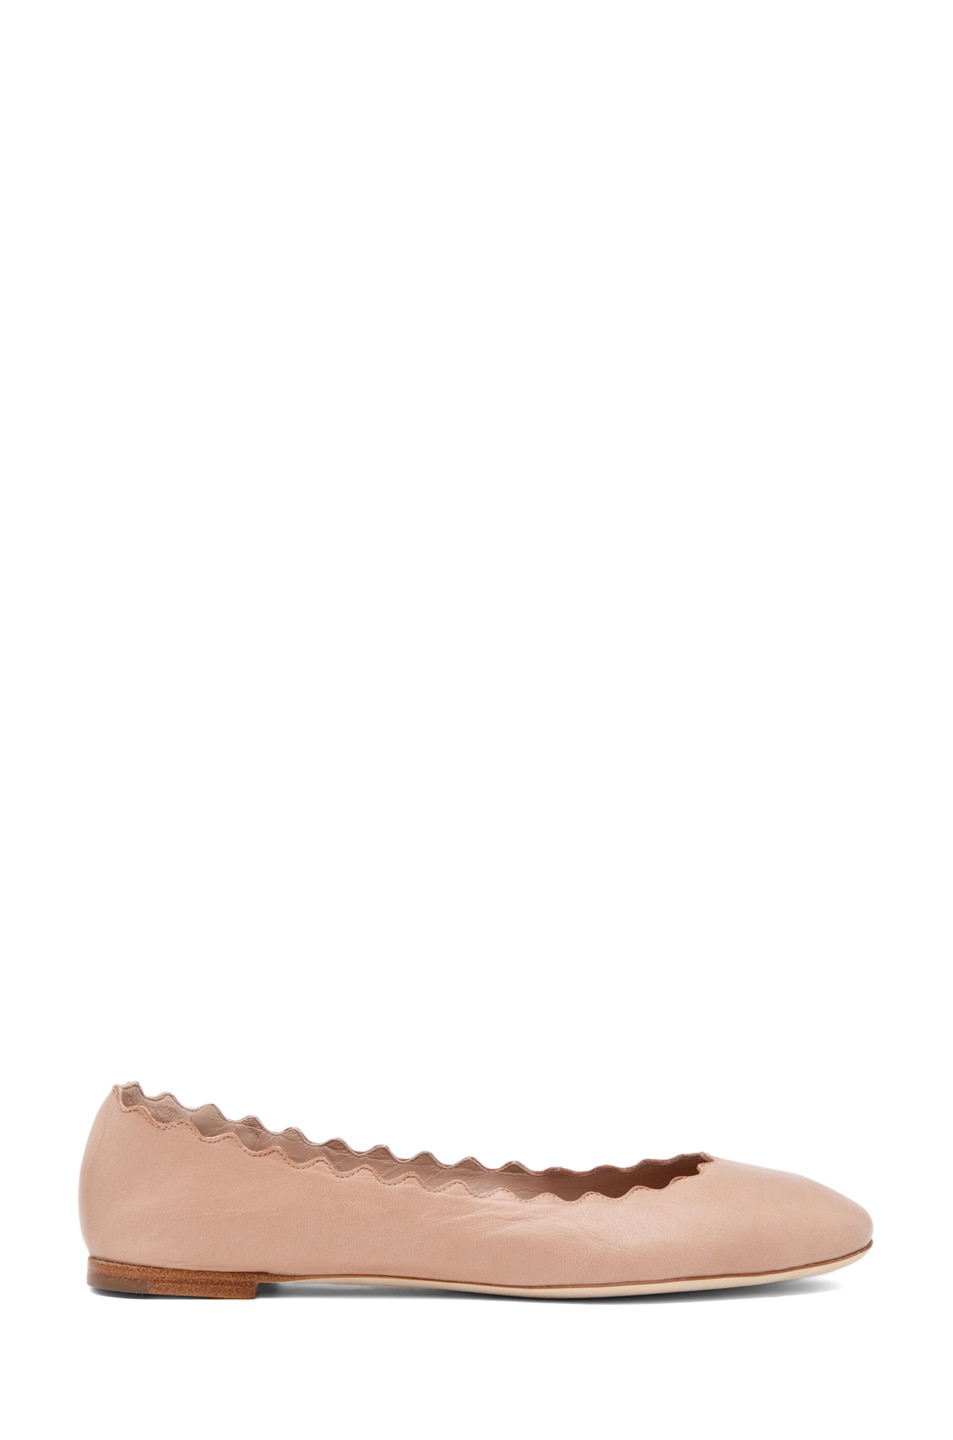 Image 1 of Chloe Leather Scalloped Flats in Nude